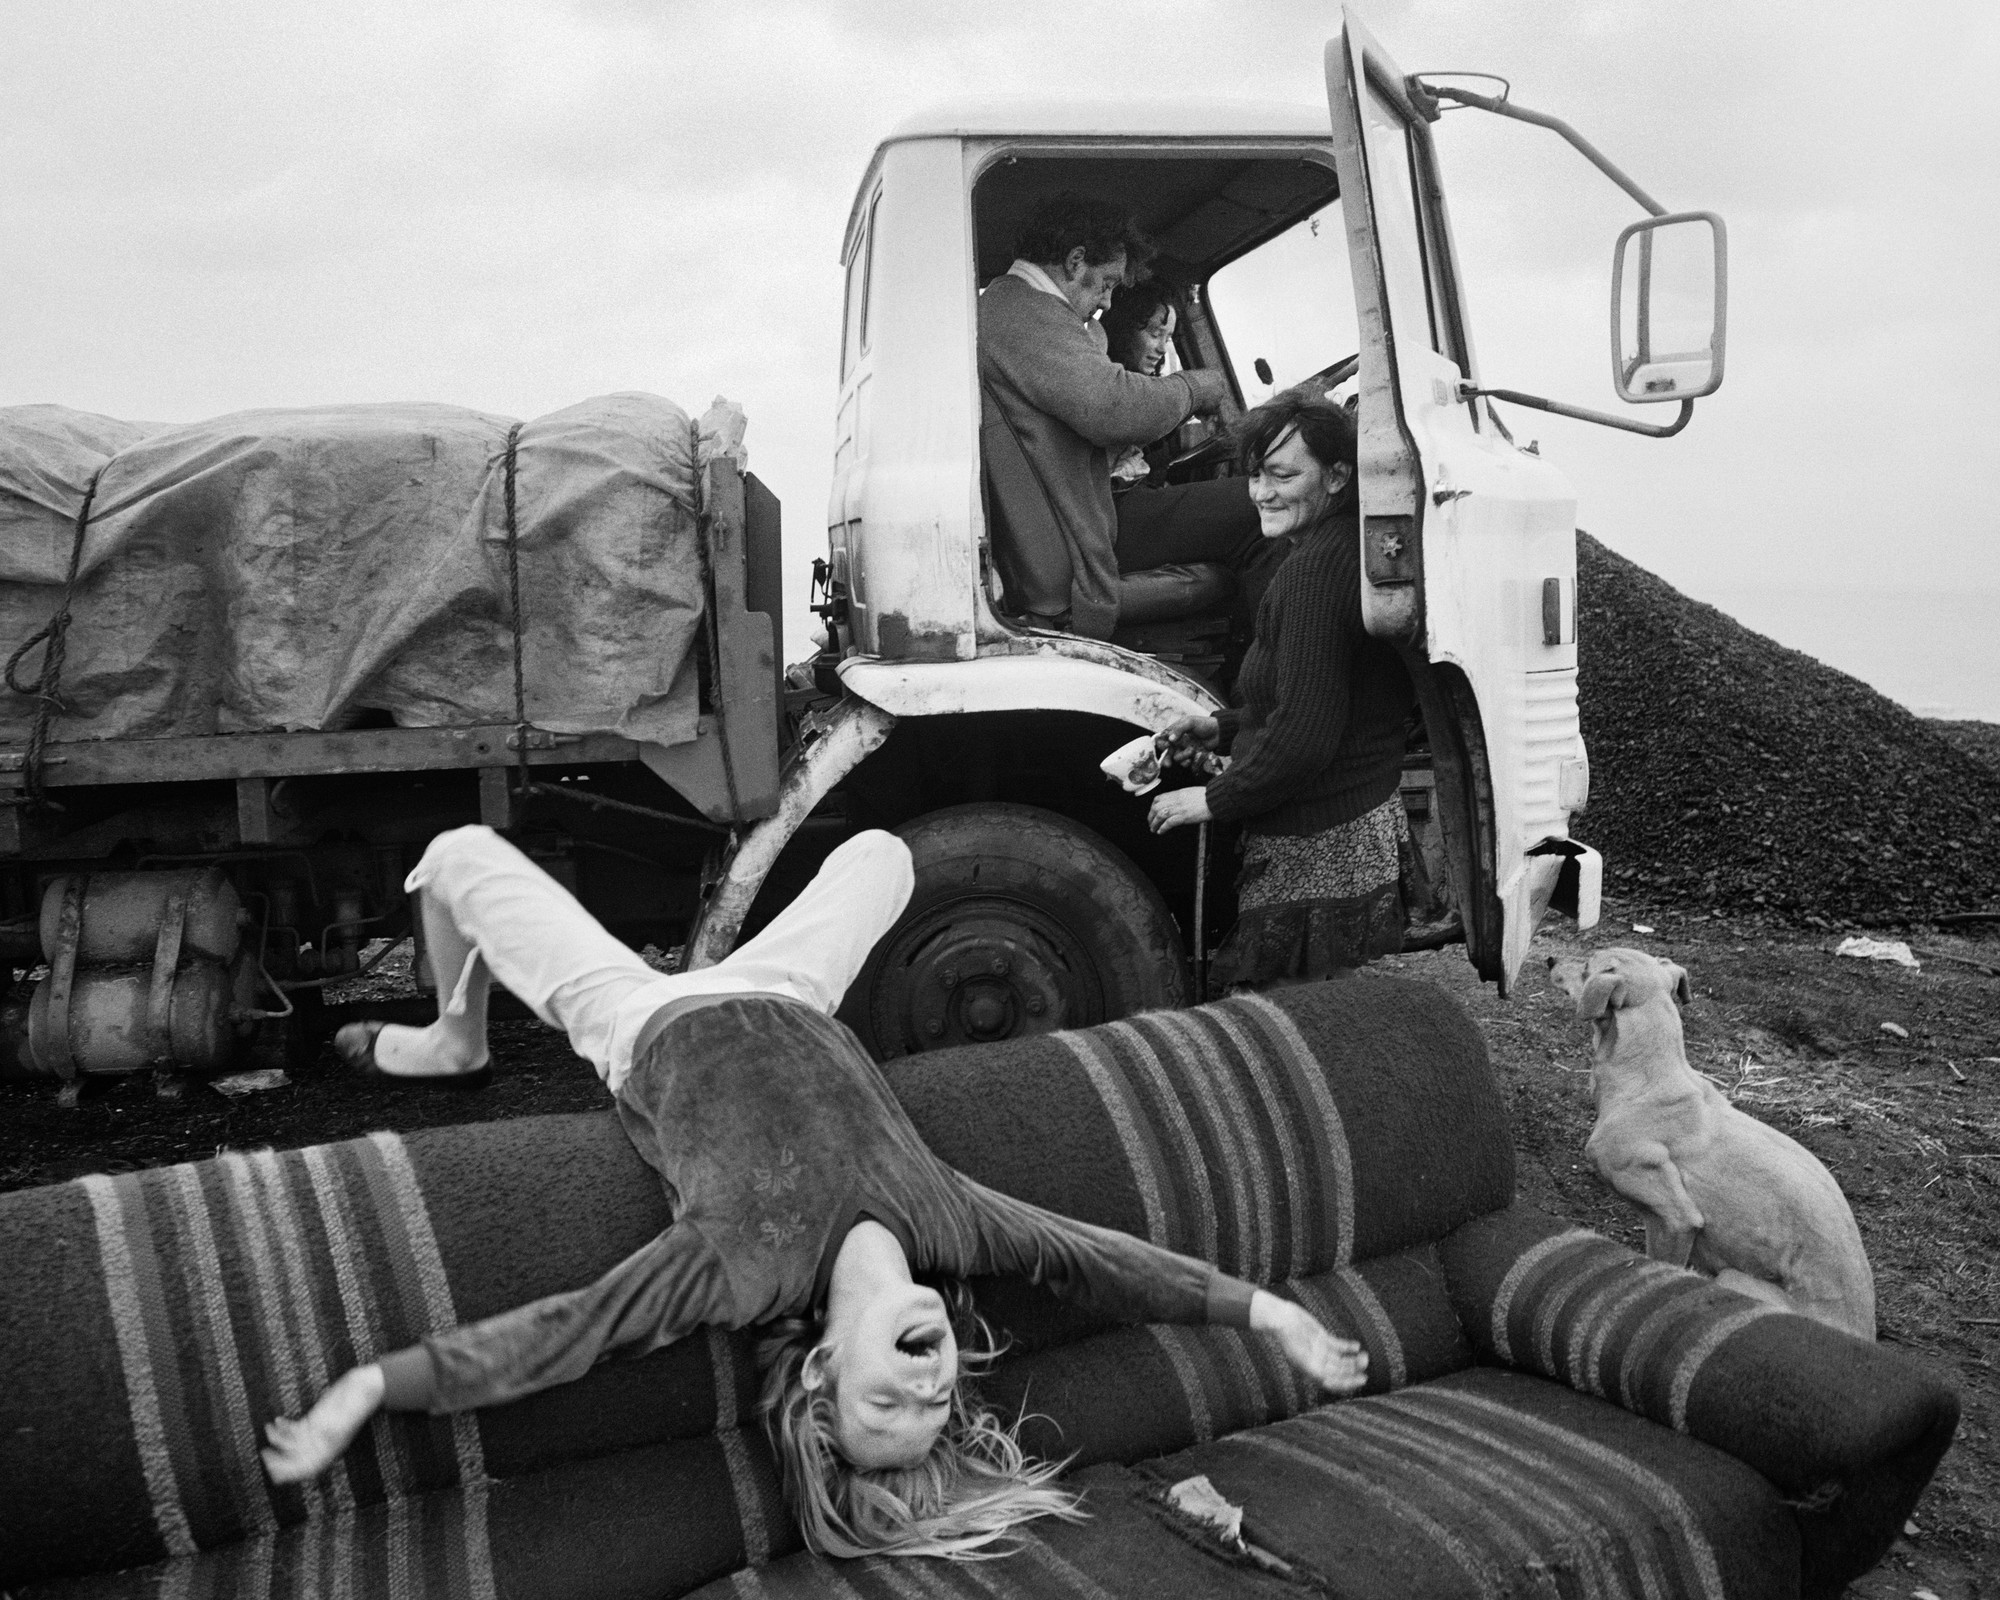 "Helen (upside down), Brian, Alison and Rosie, Seacoal Camp, Lynemouth, Northumberland," 1983, by Chris Killip.